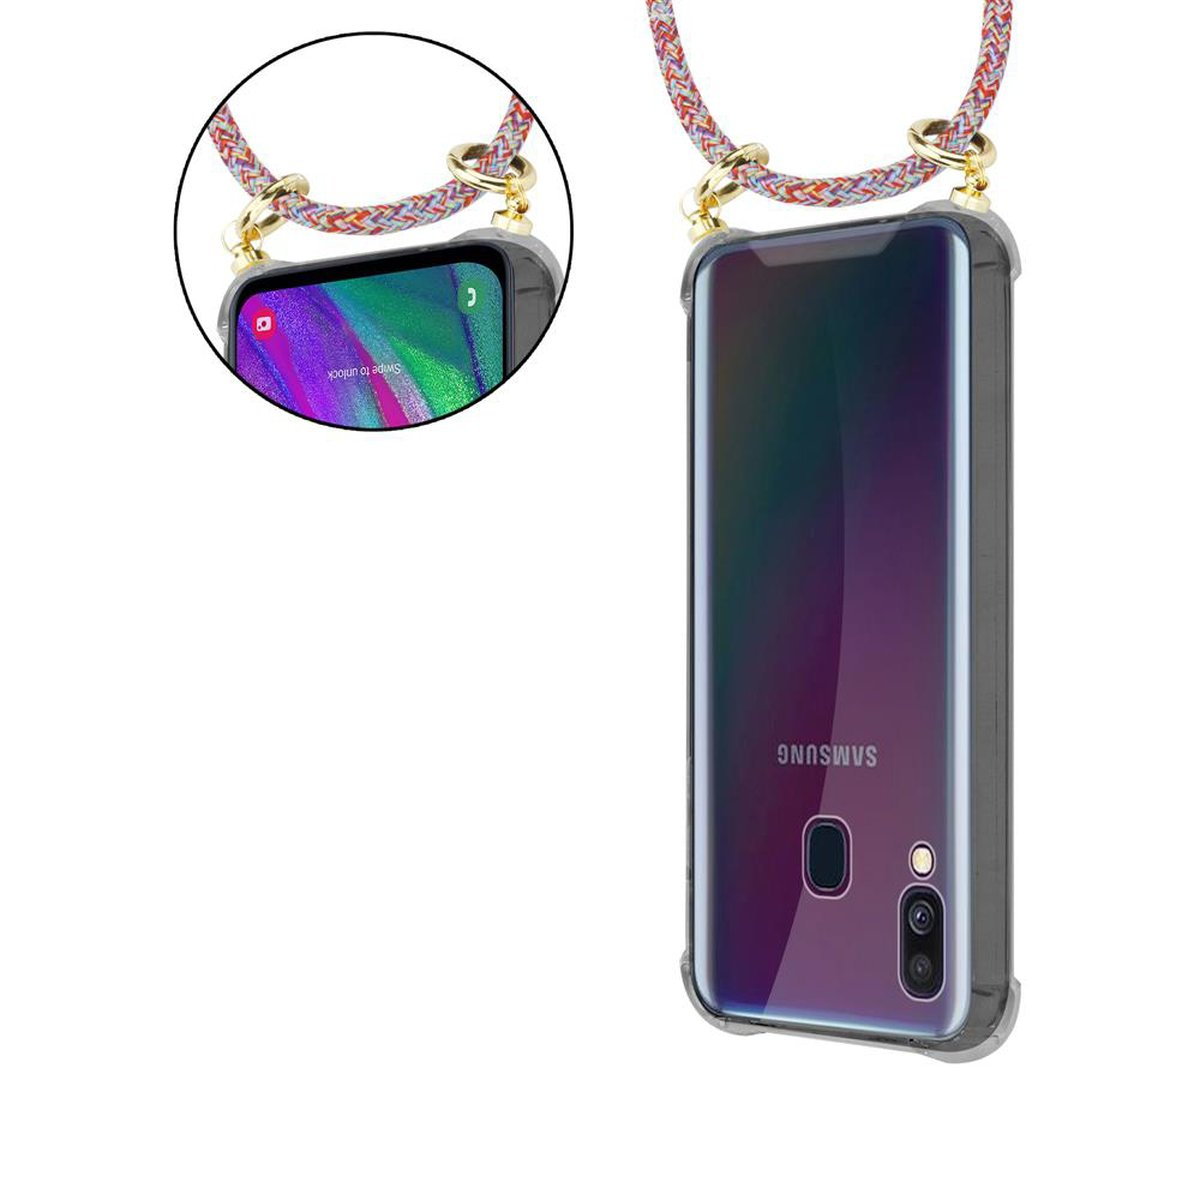 COLORFUL Samsung, abnehmbarer Gold Hülle, Handy und Backcover, Ringen, mit A40, PARROT Kette Kordel CADORABO Band Galaxy